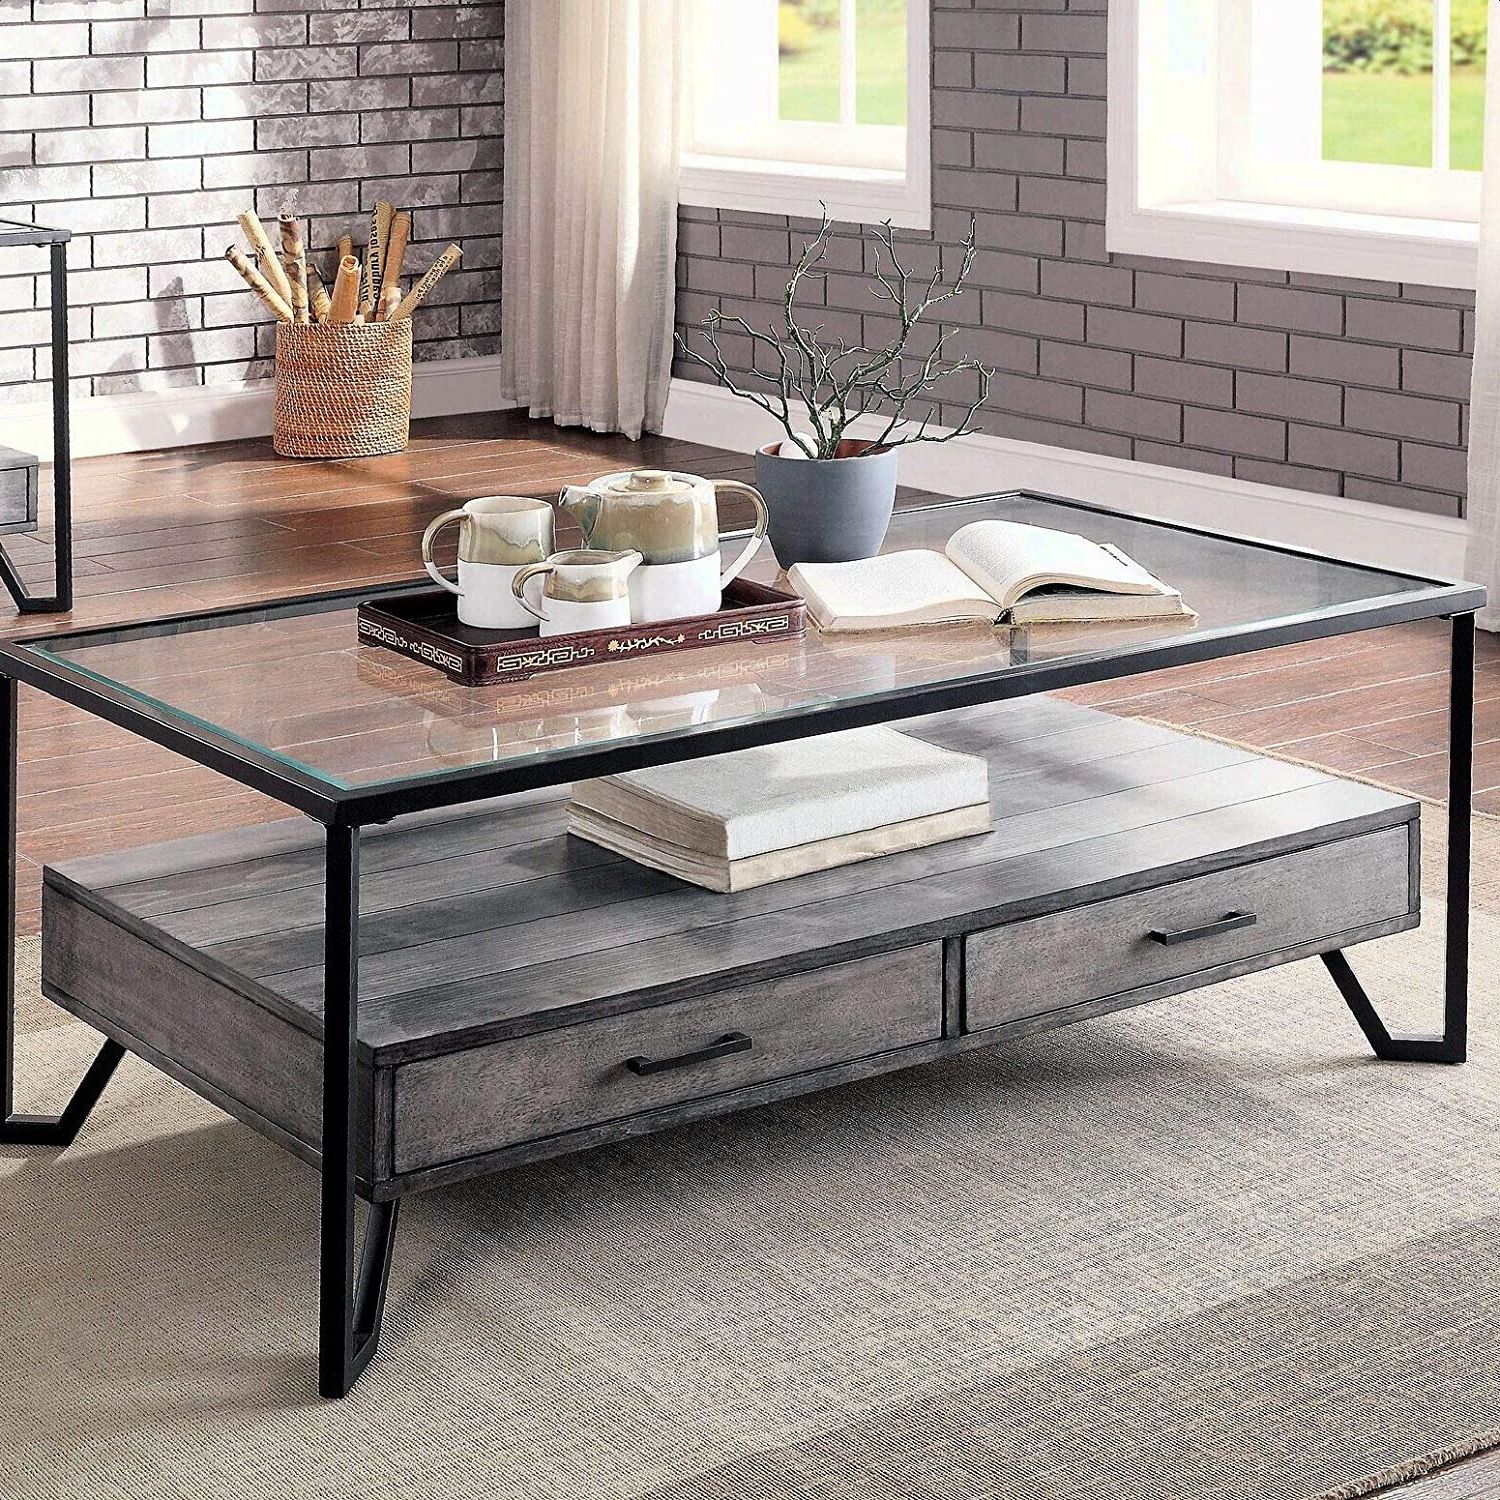 Current Open Storage Coffee Tables Inside Amazon: Etude Coffee Table With Storage, Rectangular Tabletop, Open (View 1 of 10)